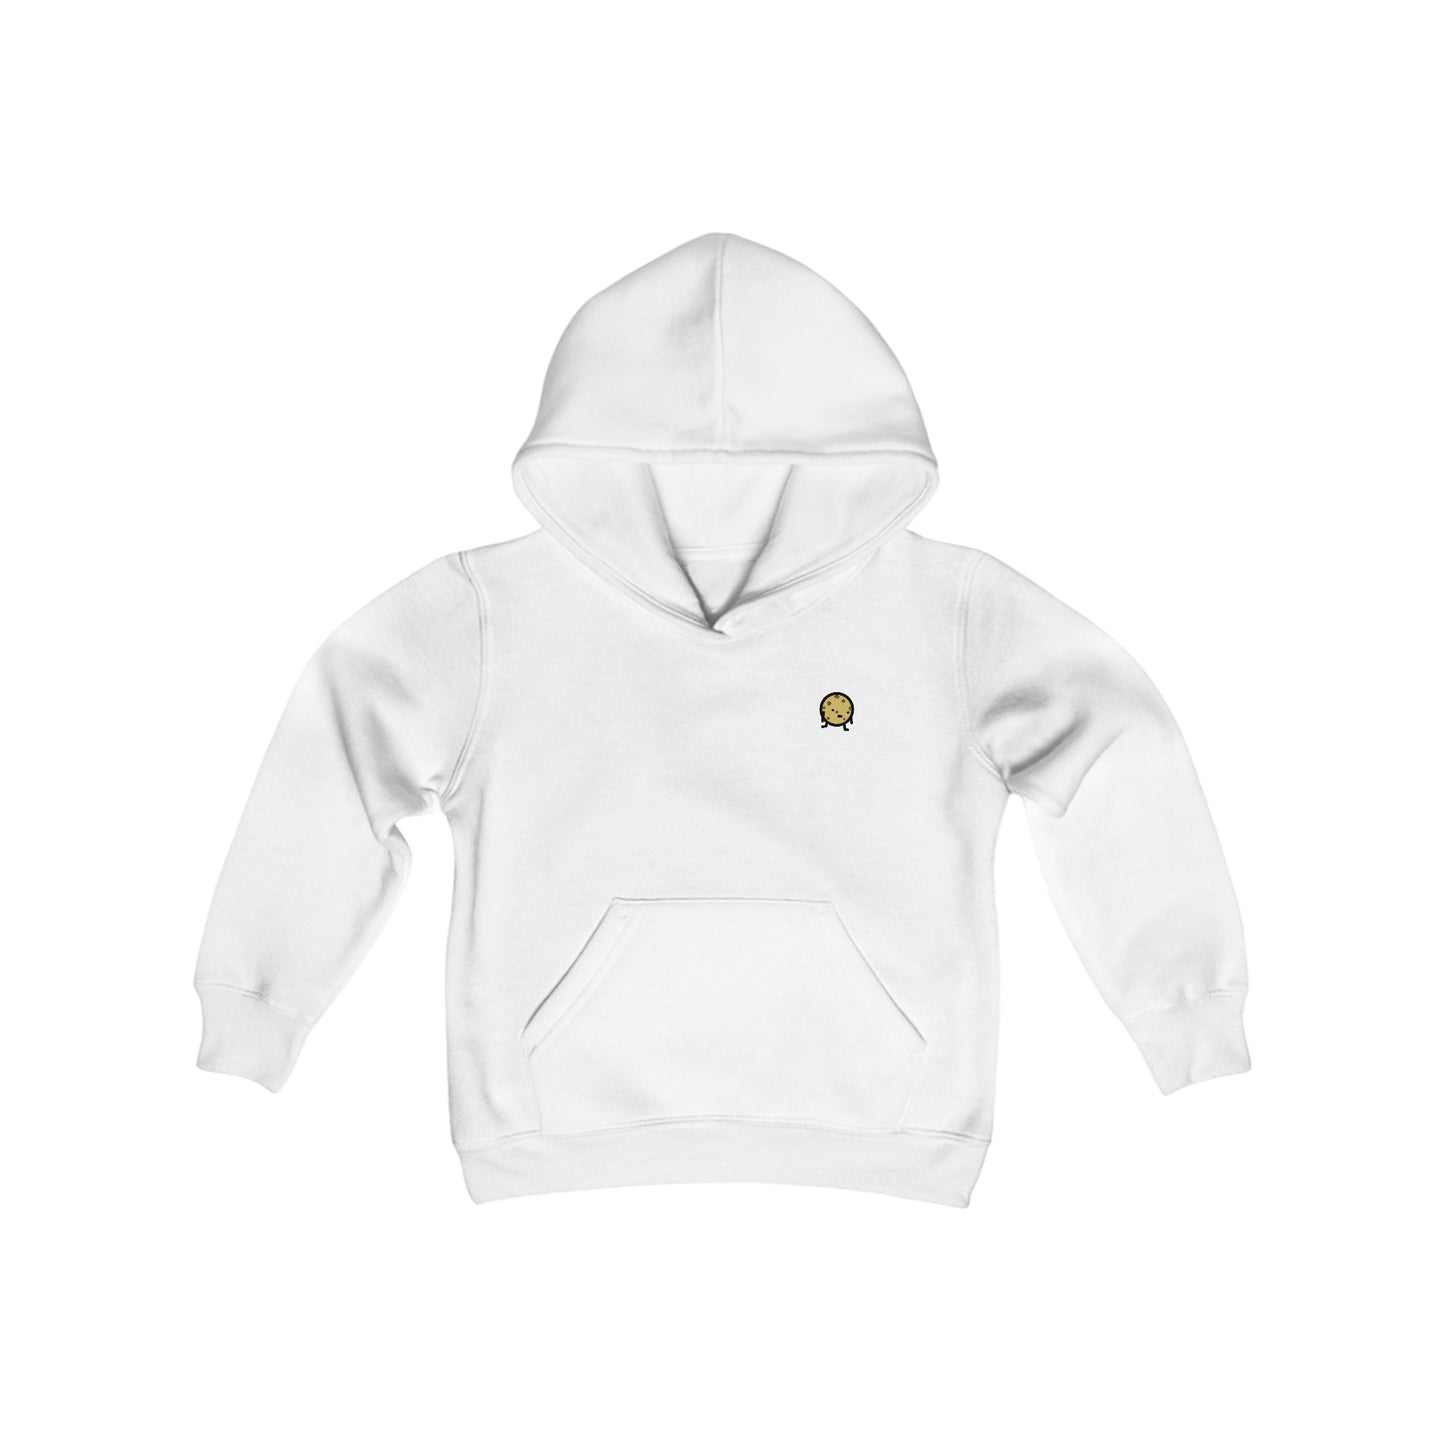 Small Cookie - Youth Heavy Blend Hooded Sweatshirt